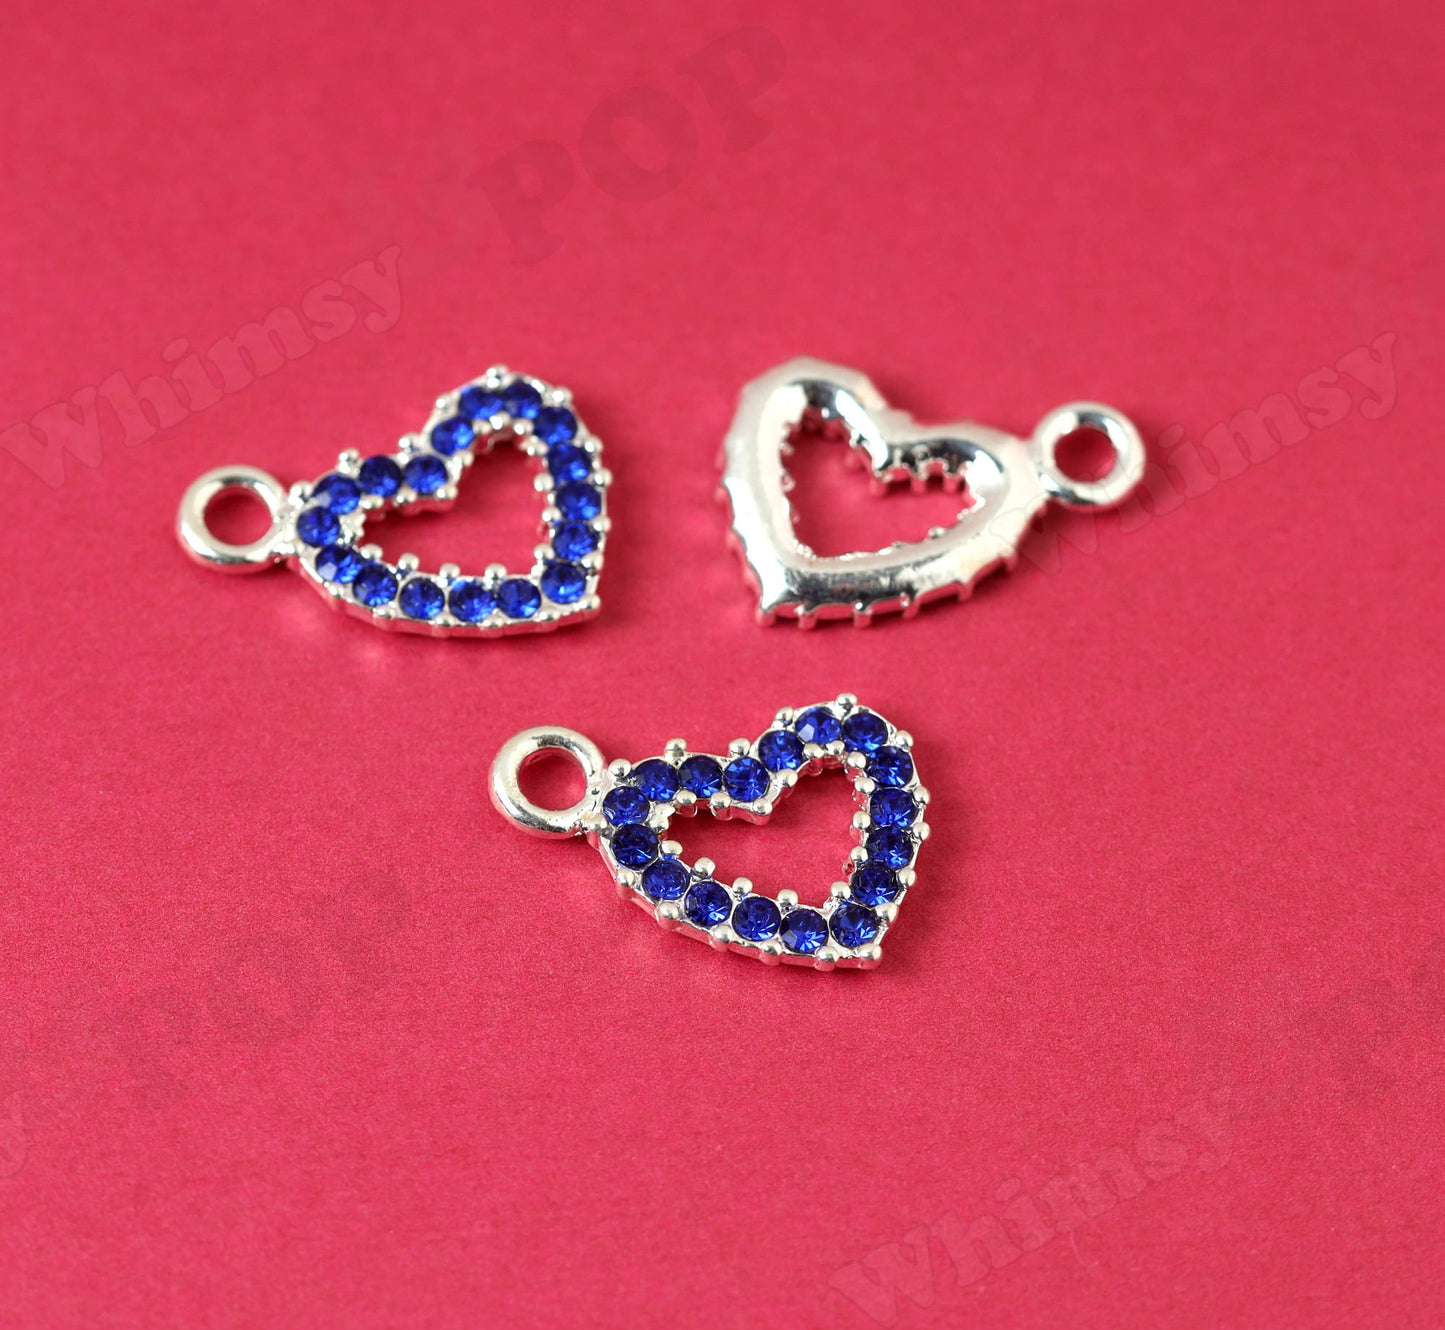 Blue Heart Charms in Many Colors for DIY Jewelry